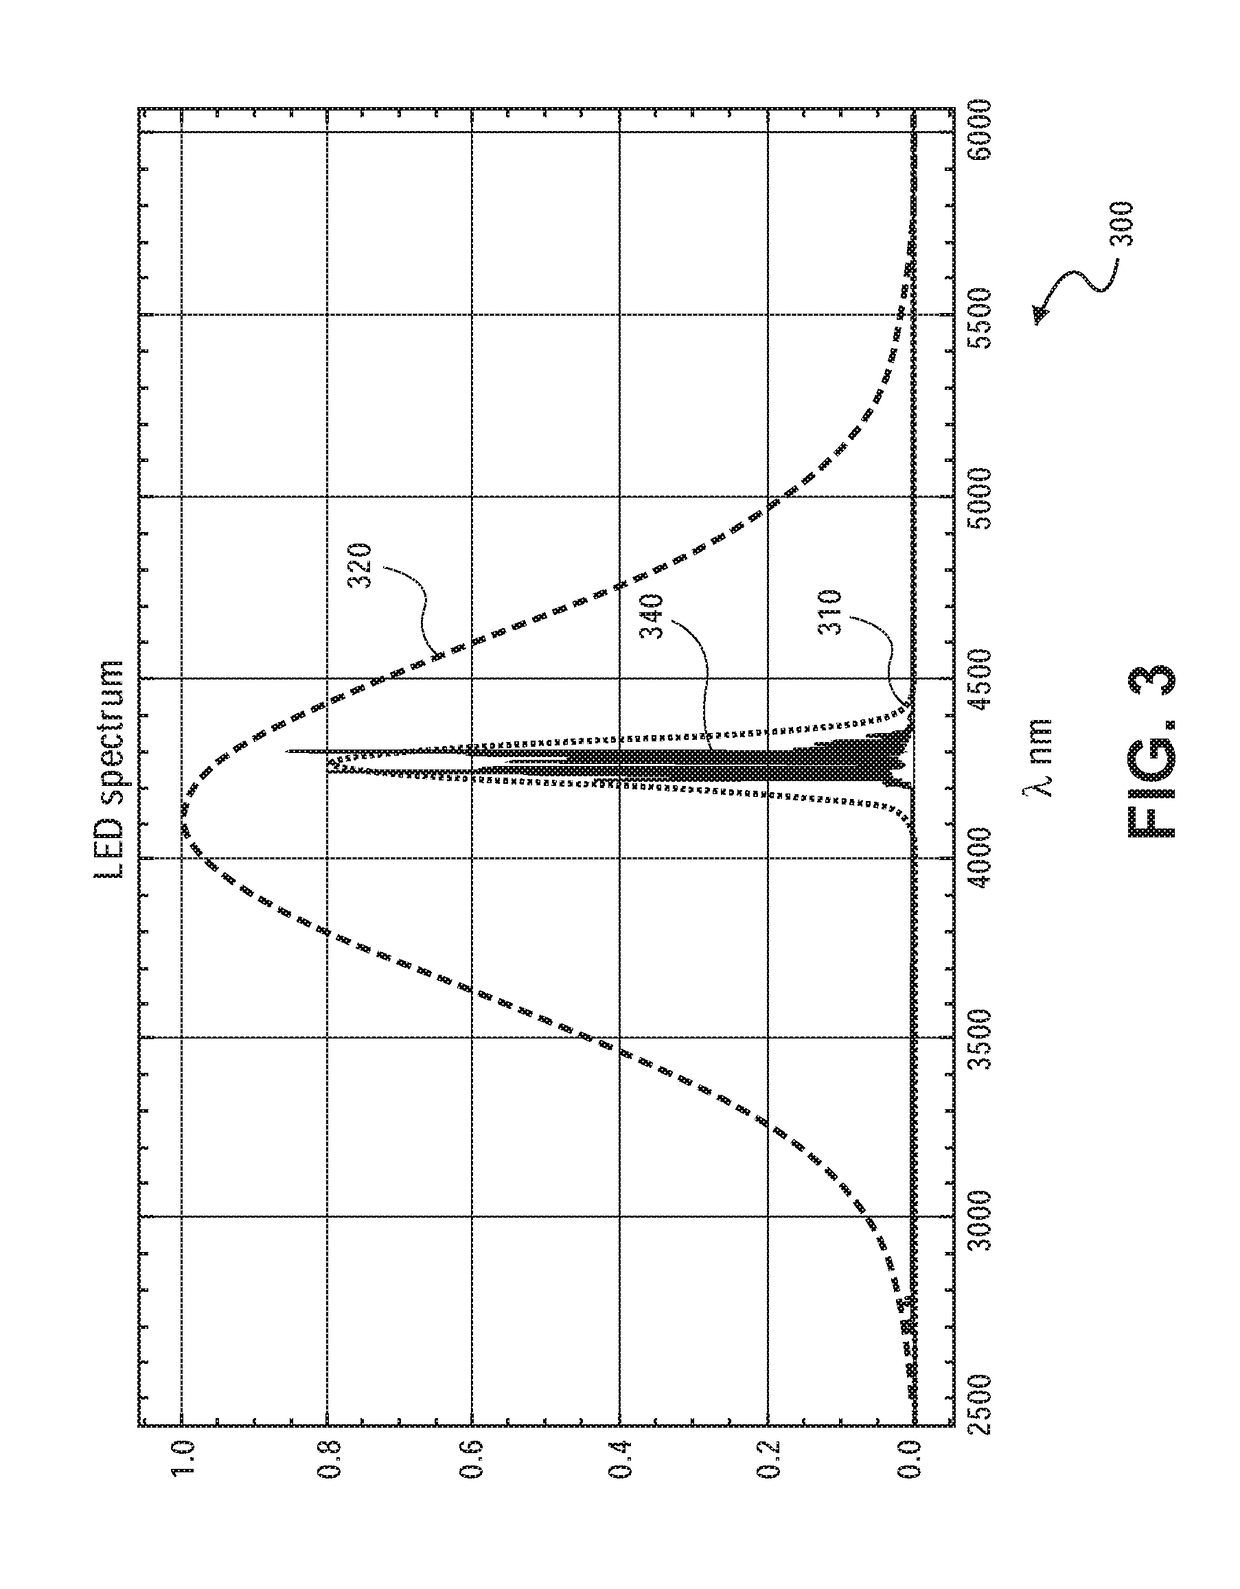 Compact optical gas detection system and apparatus